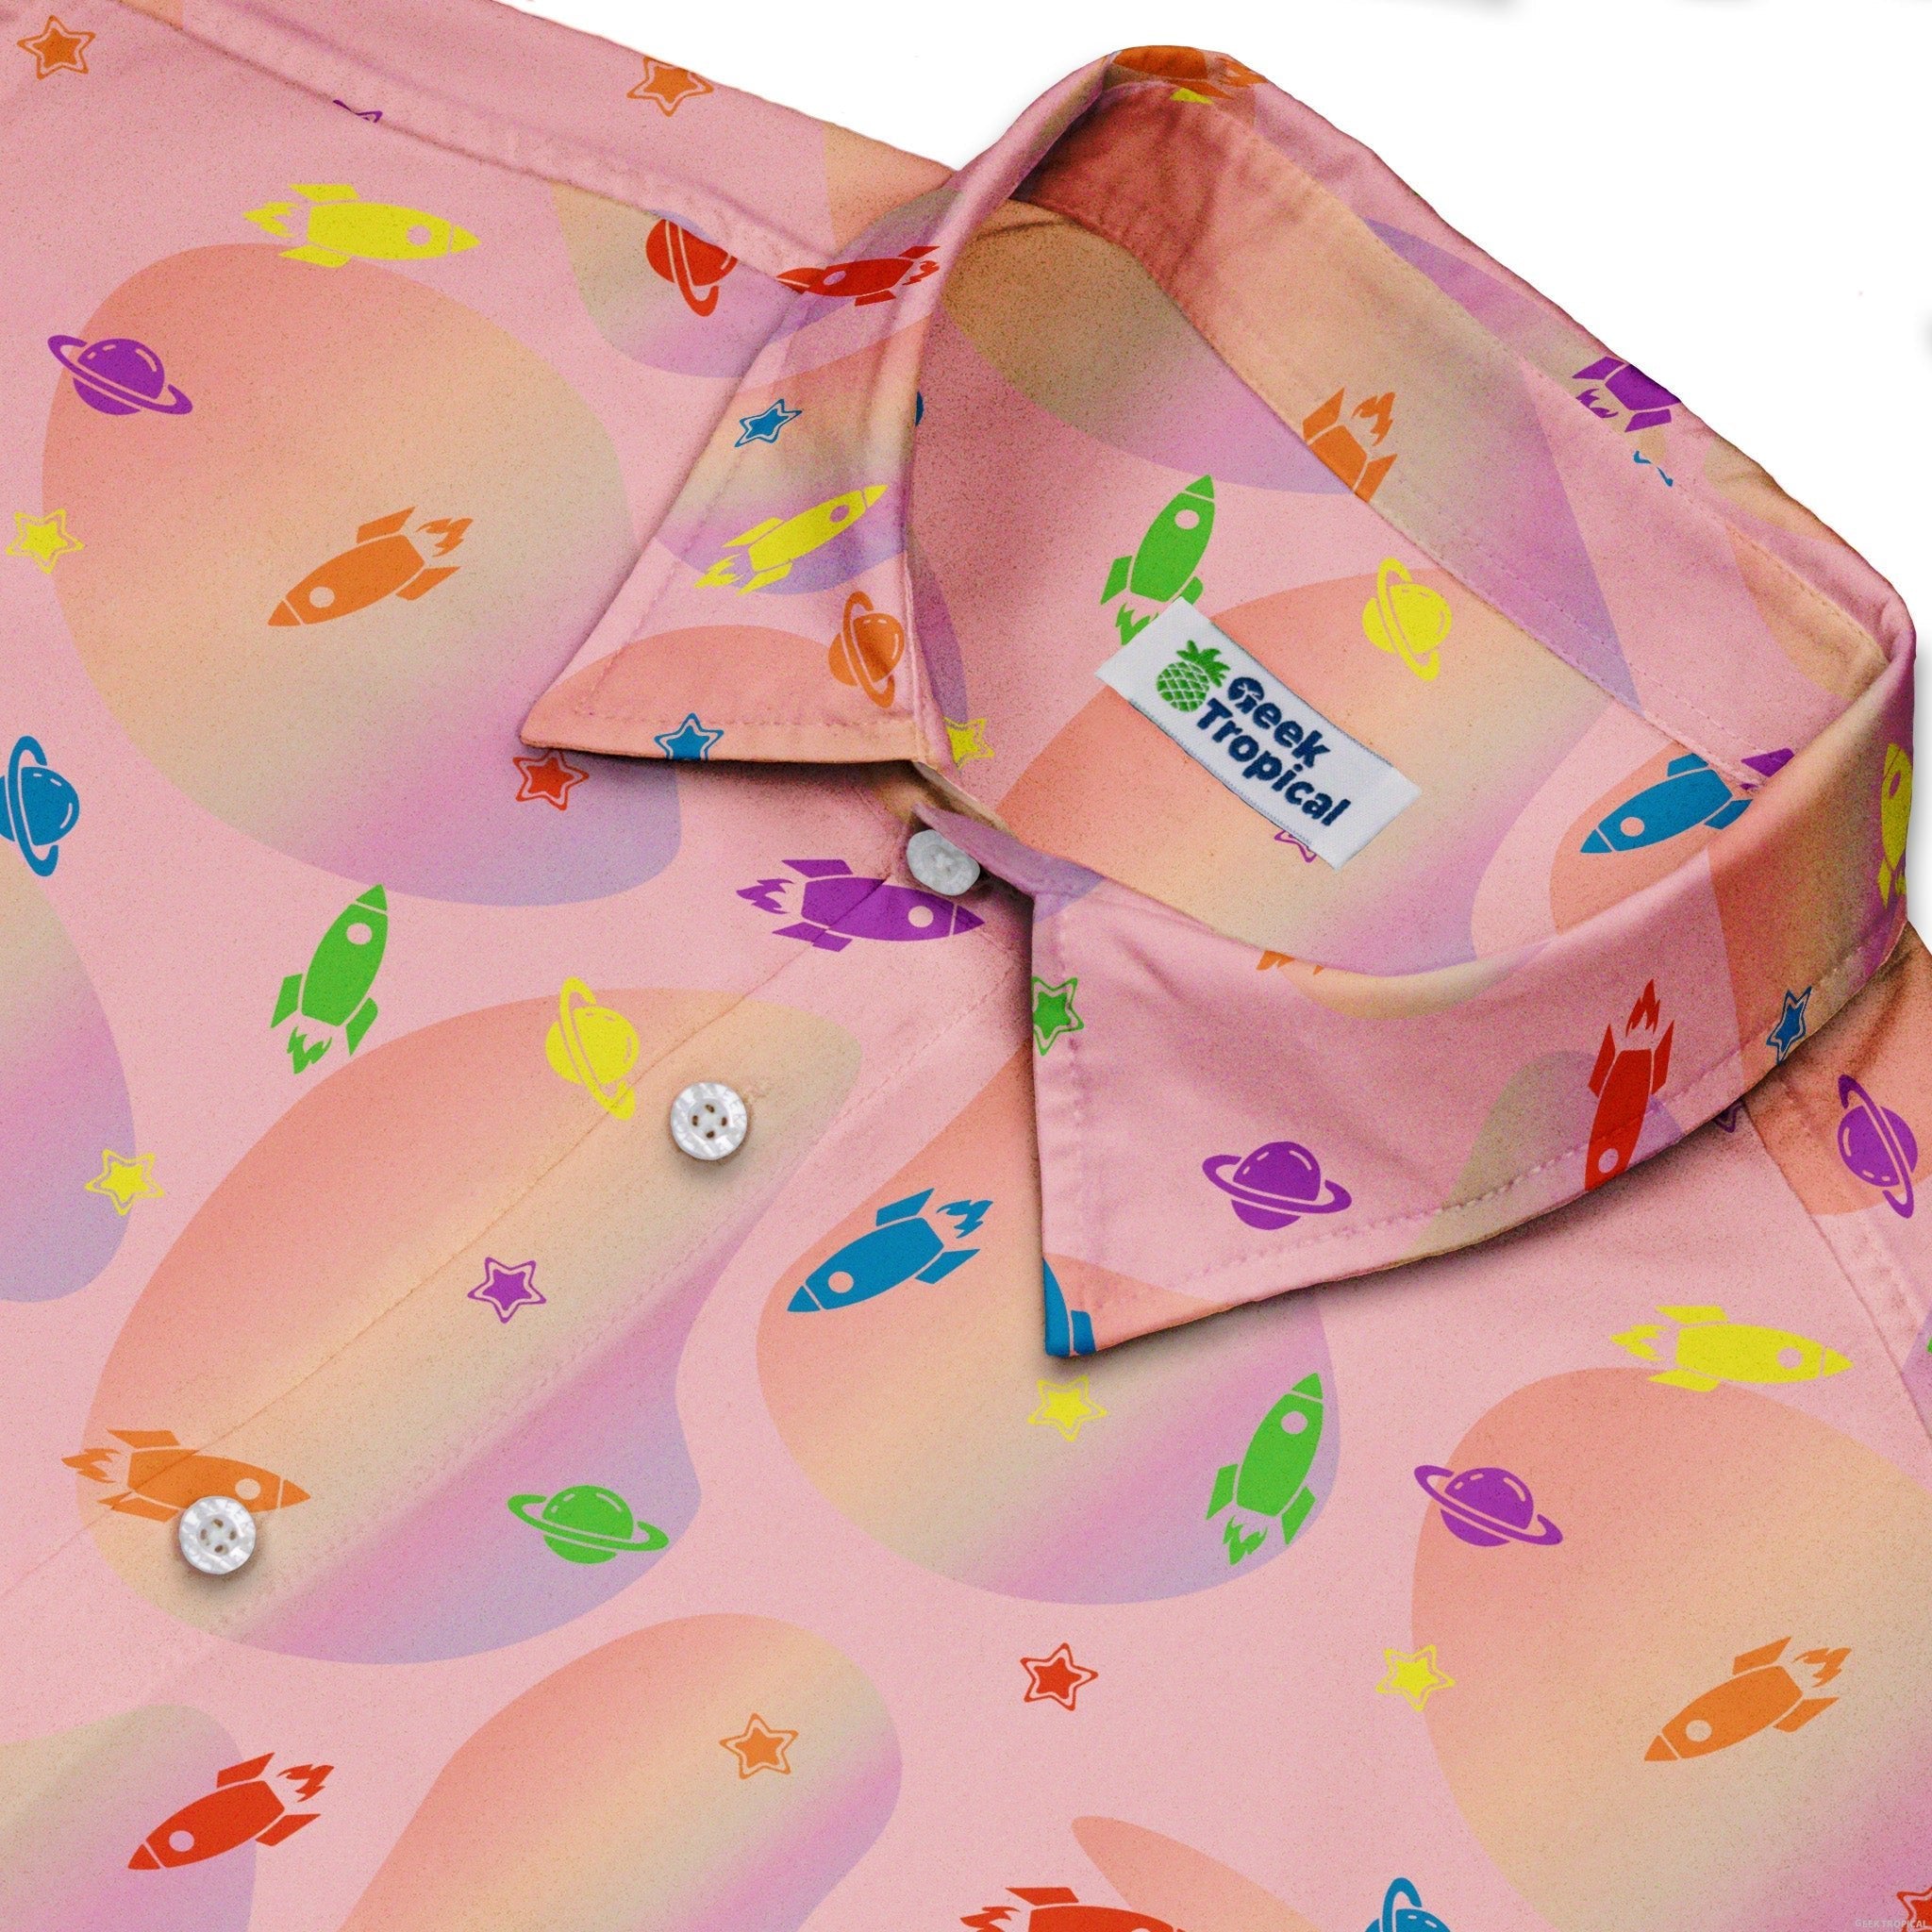 Space Pride Pink Button Up Shirt - adult sizing - outer space & astronaut print - Pride Patterns